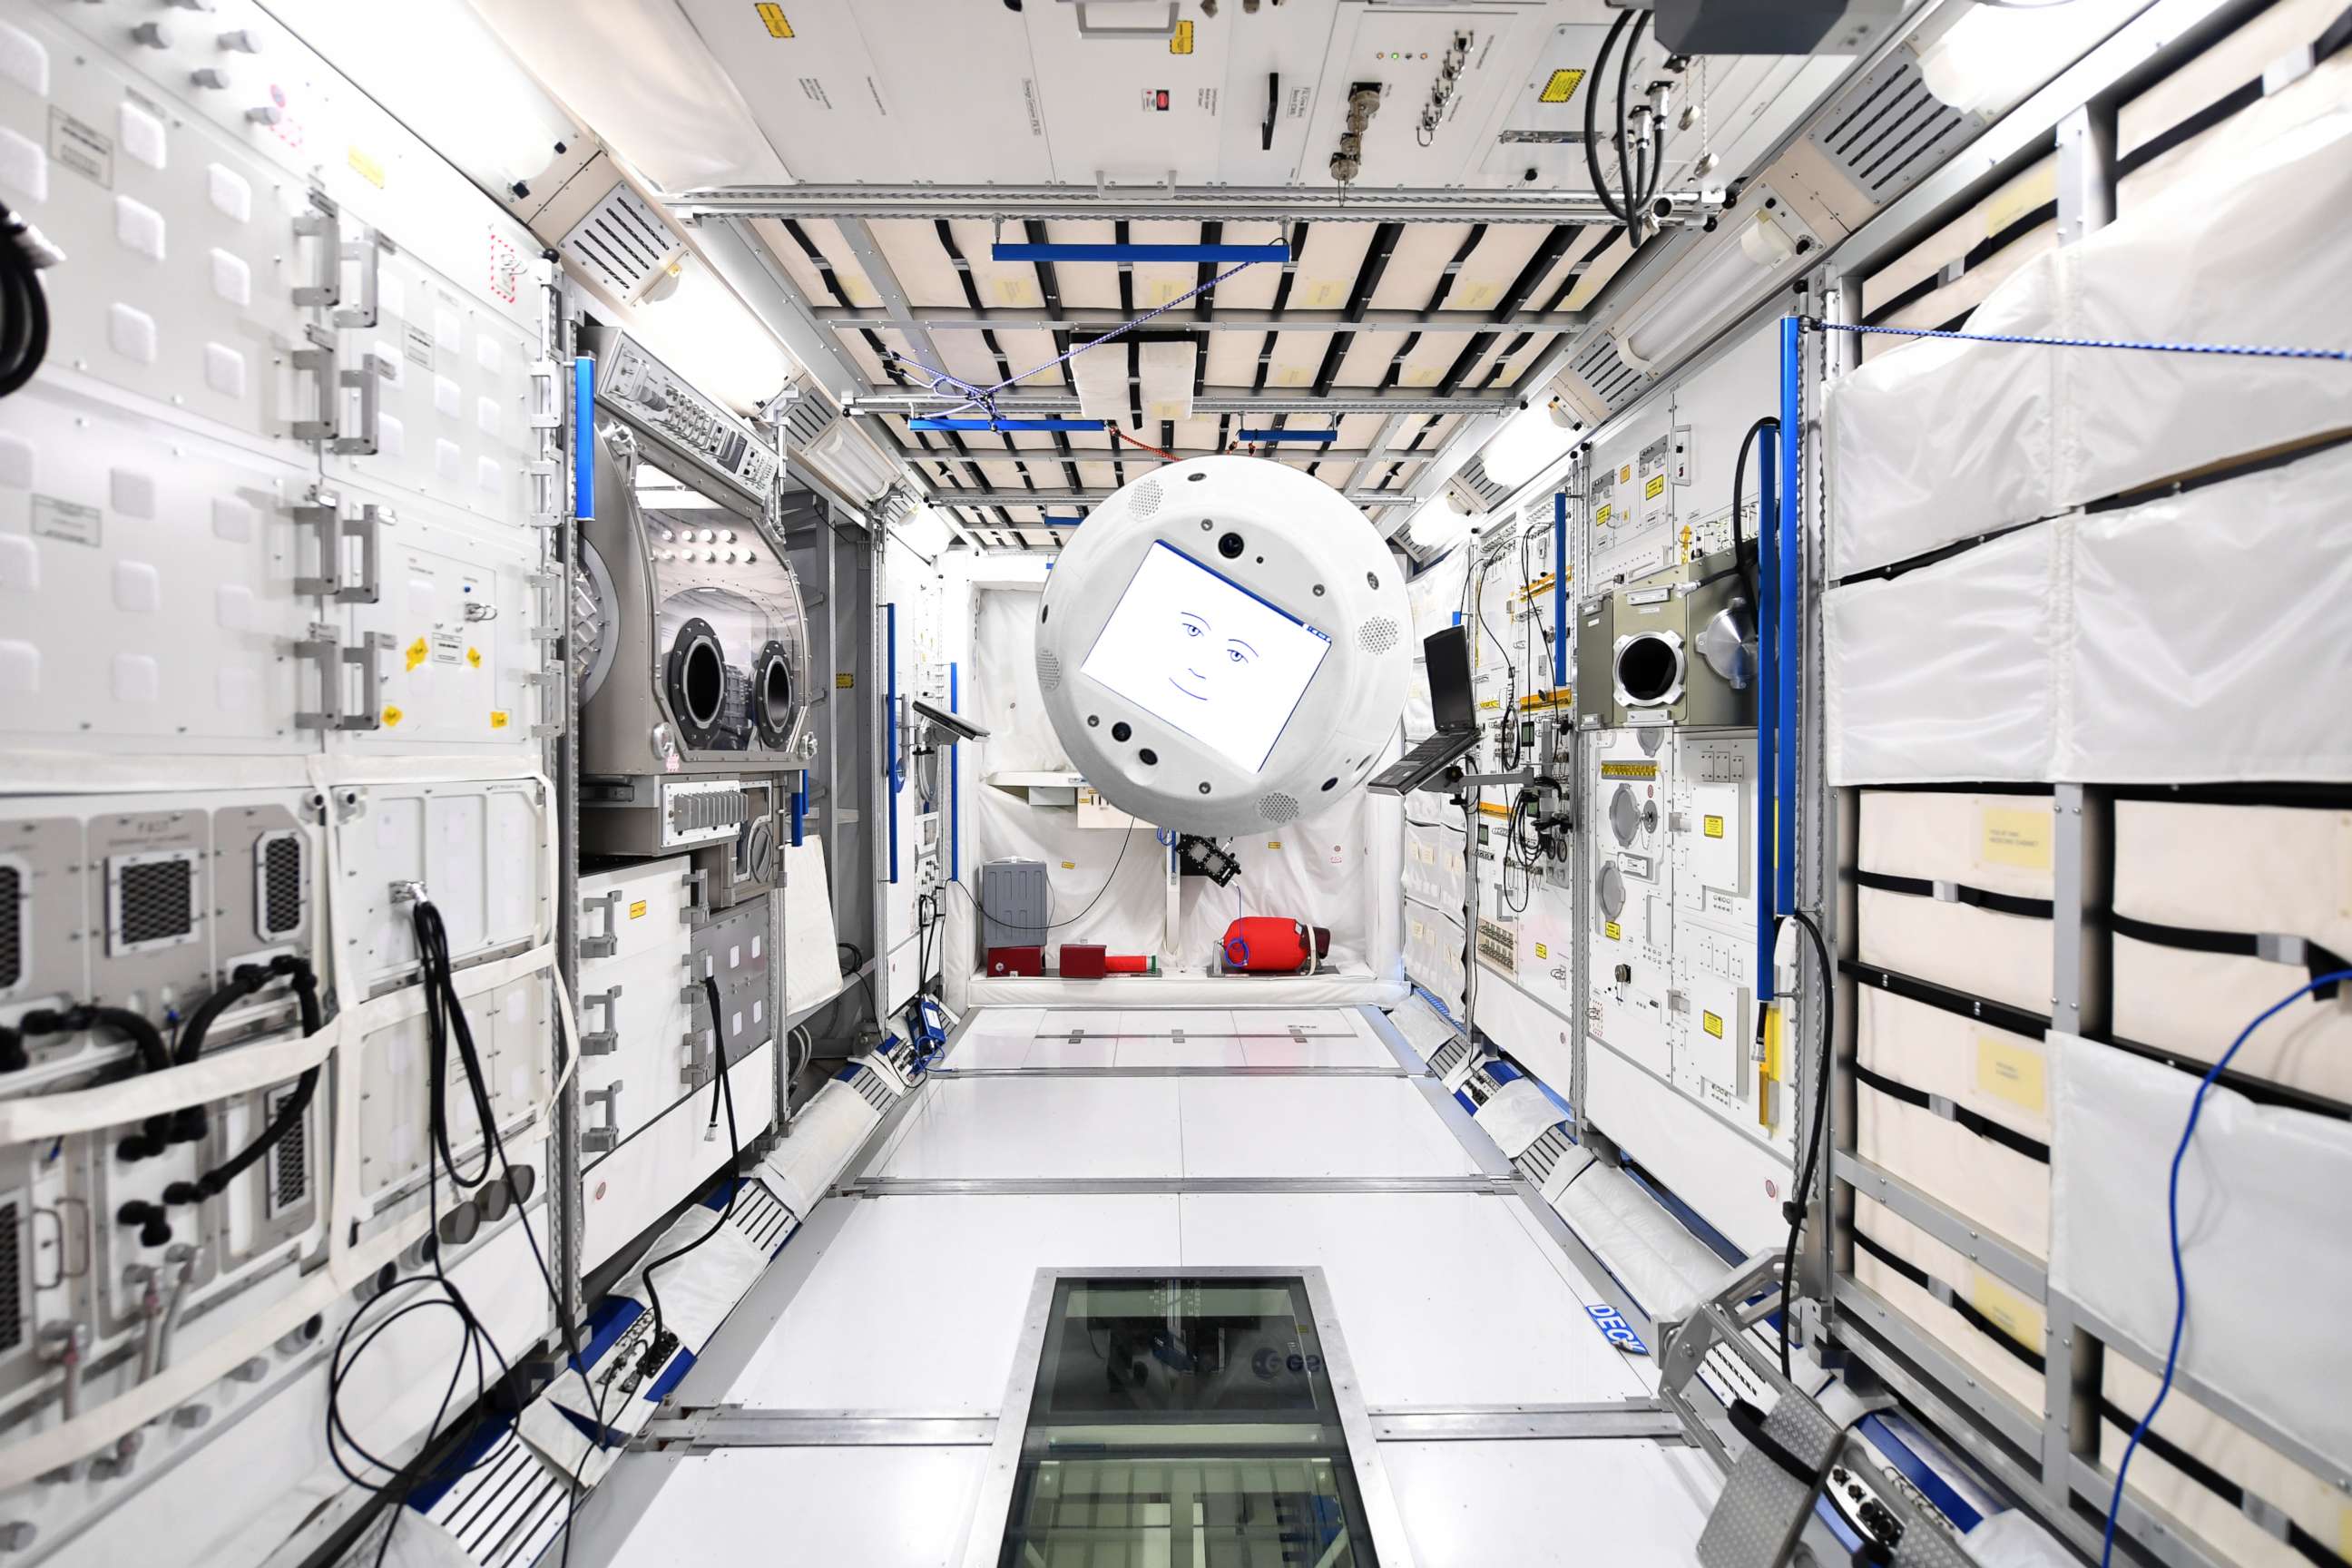 PHOTO: CIMON (Crew Interactive Mobile CompanioN),a mobile and autonomous assistance system designed to aid astronauts with their everyday tasks on the ISS powered by IBM Watson.